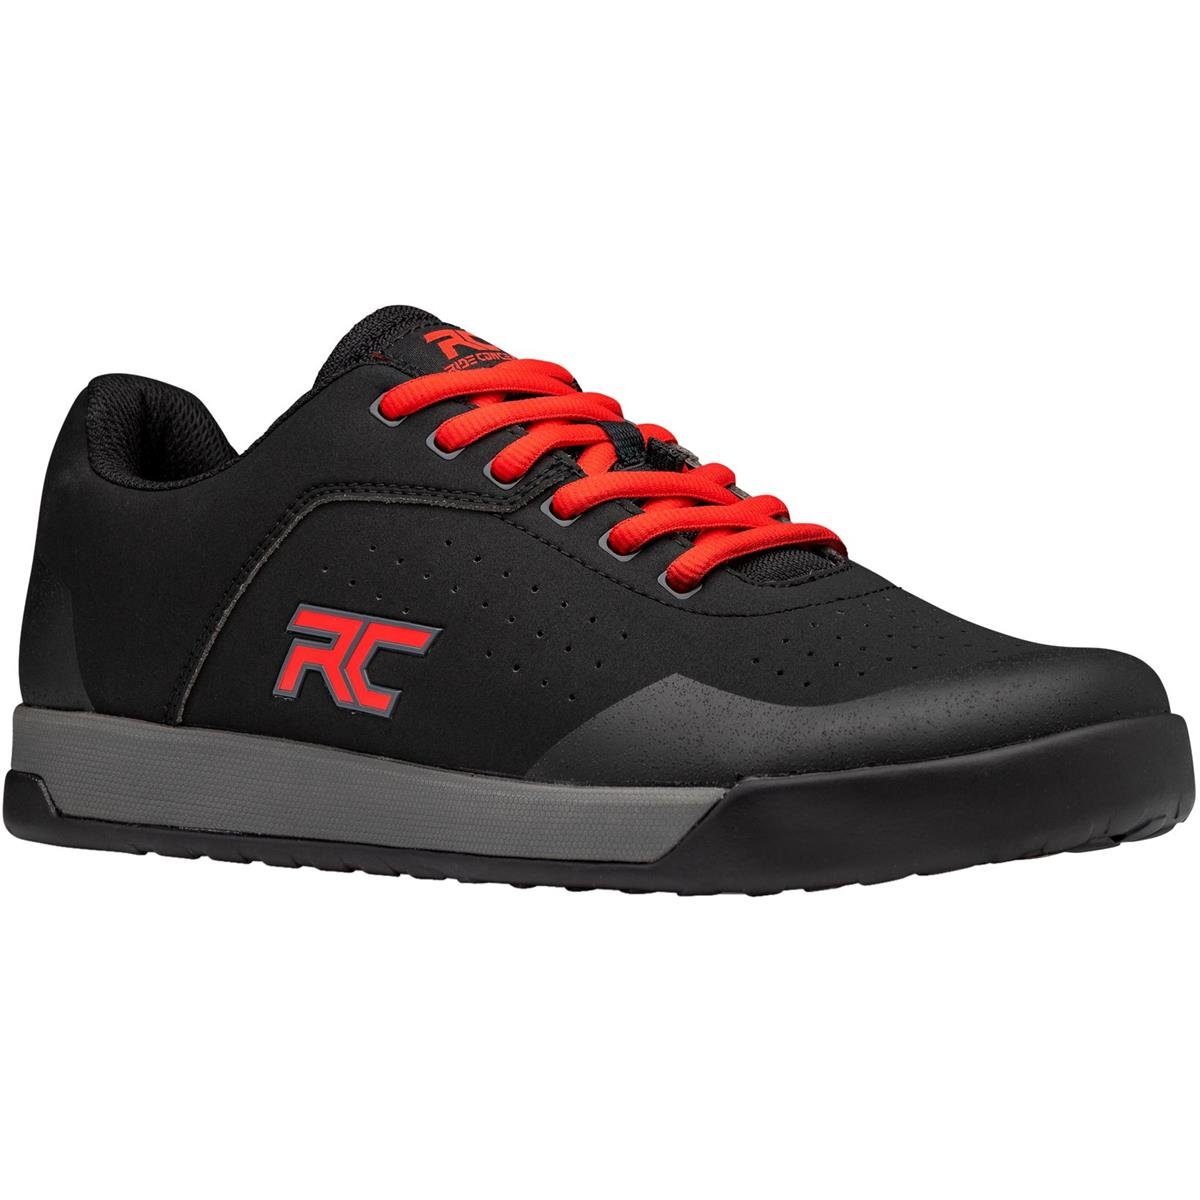 Ride Concepts Bike Shoes Hellion Black/Red